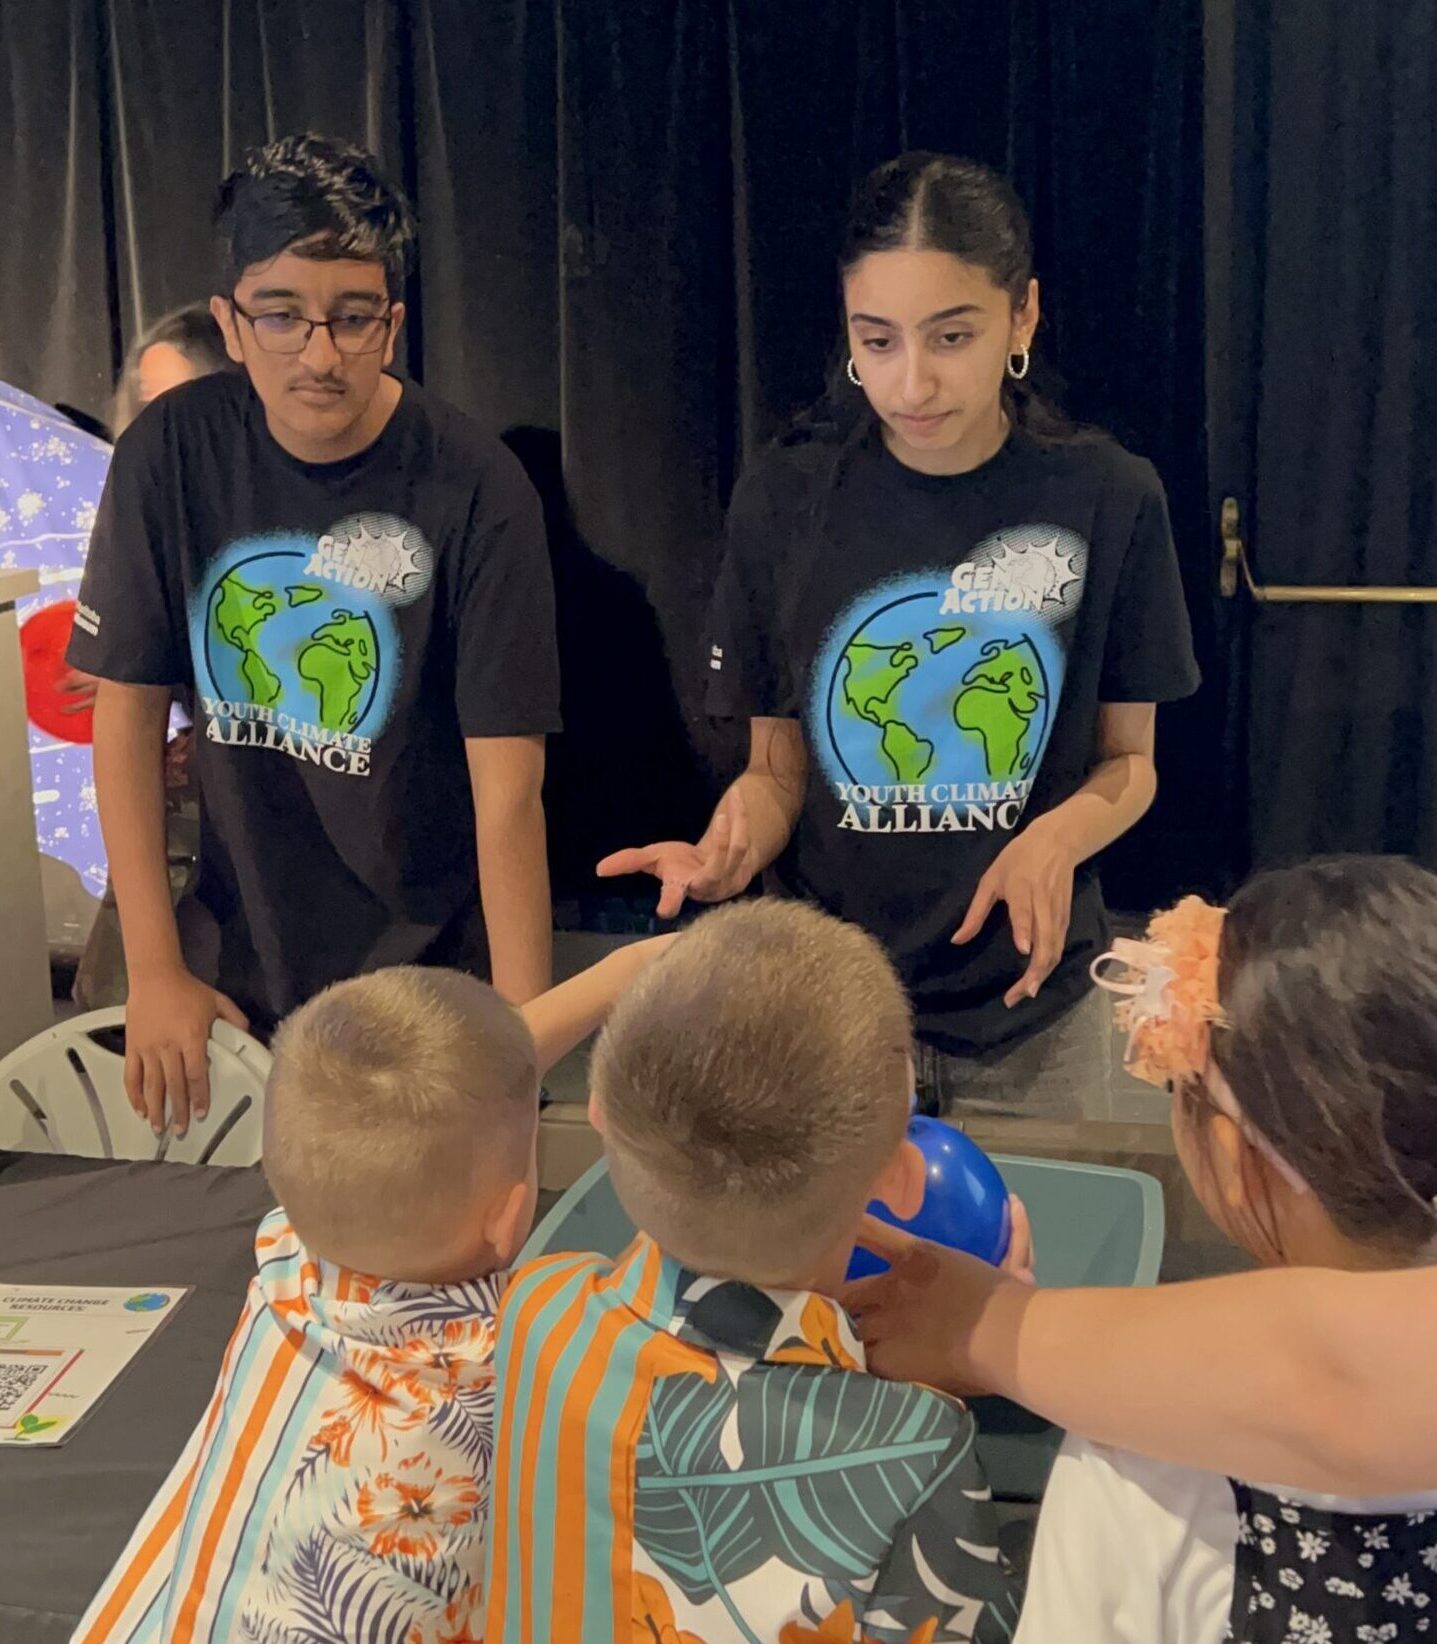 Two youth wearing Youth Climate Alliance t-shirts engage with three young visitors at a pop-up exhibit.